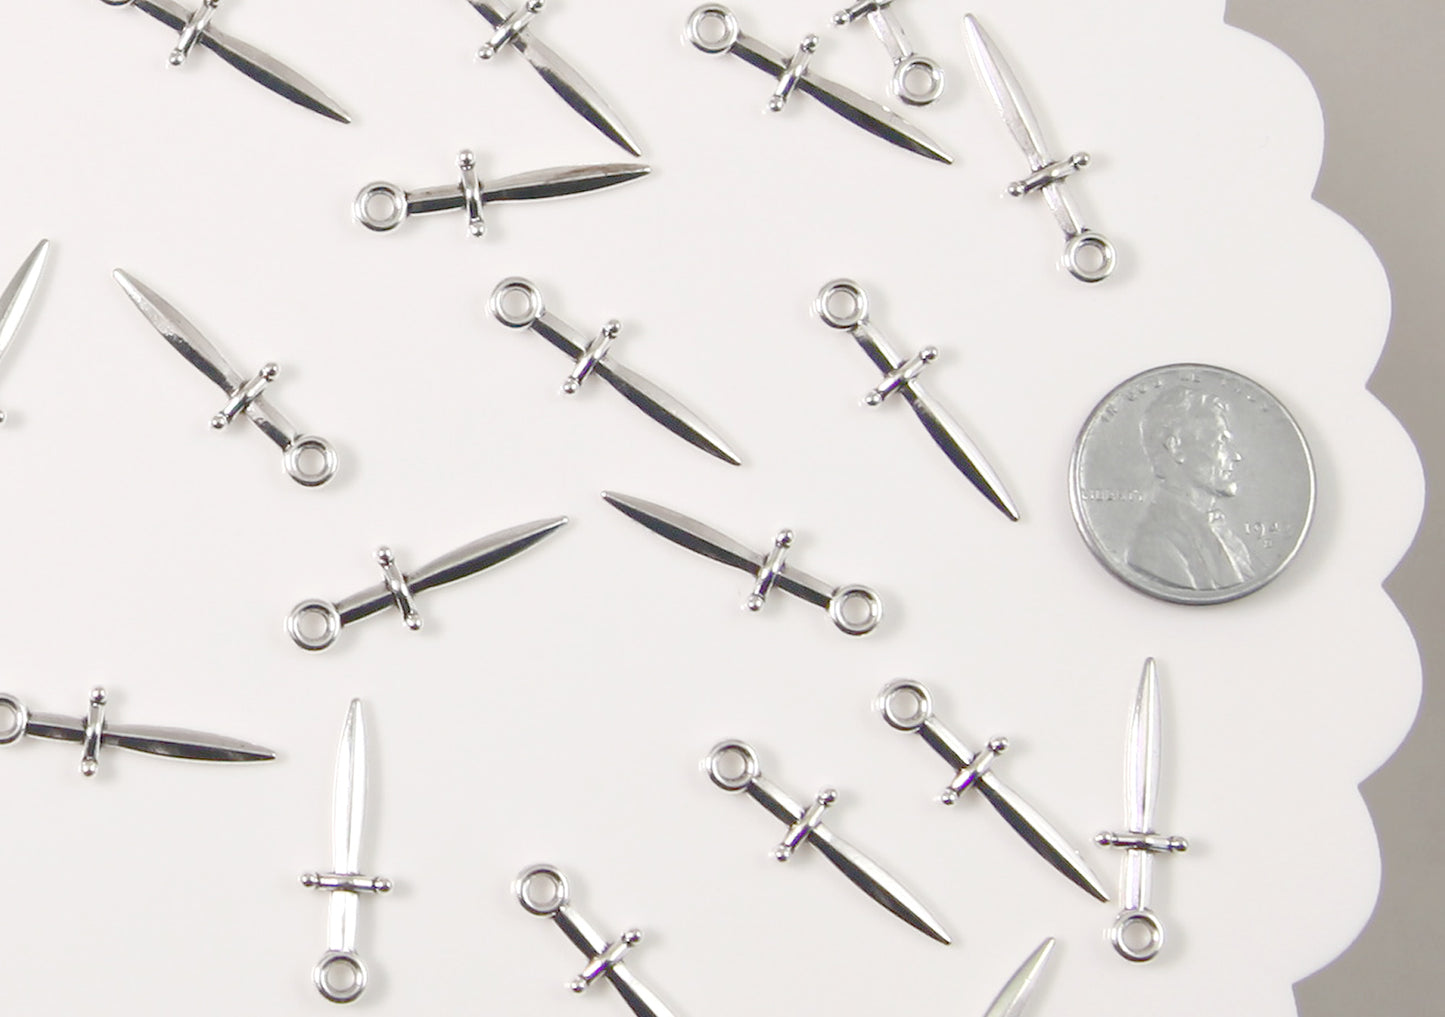 Tiny Sword Charms - 20 pc set - 23mm Metal Sword or Knife Charm - Easy to Make into Earrings